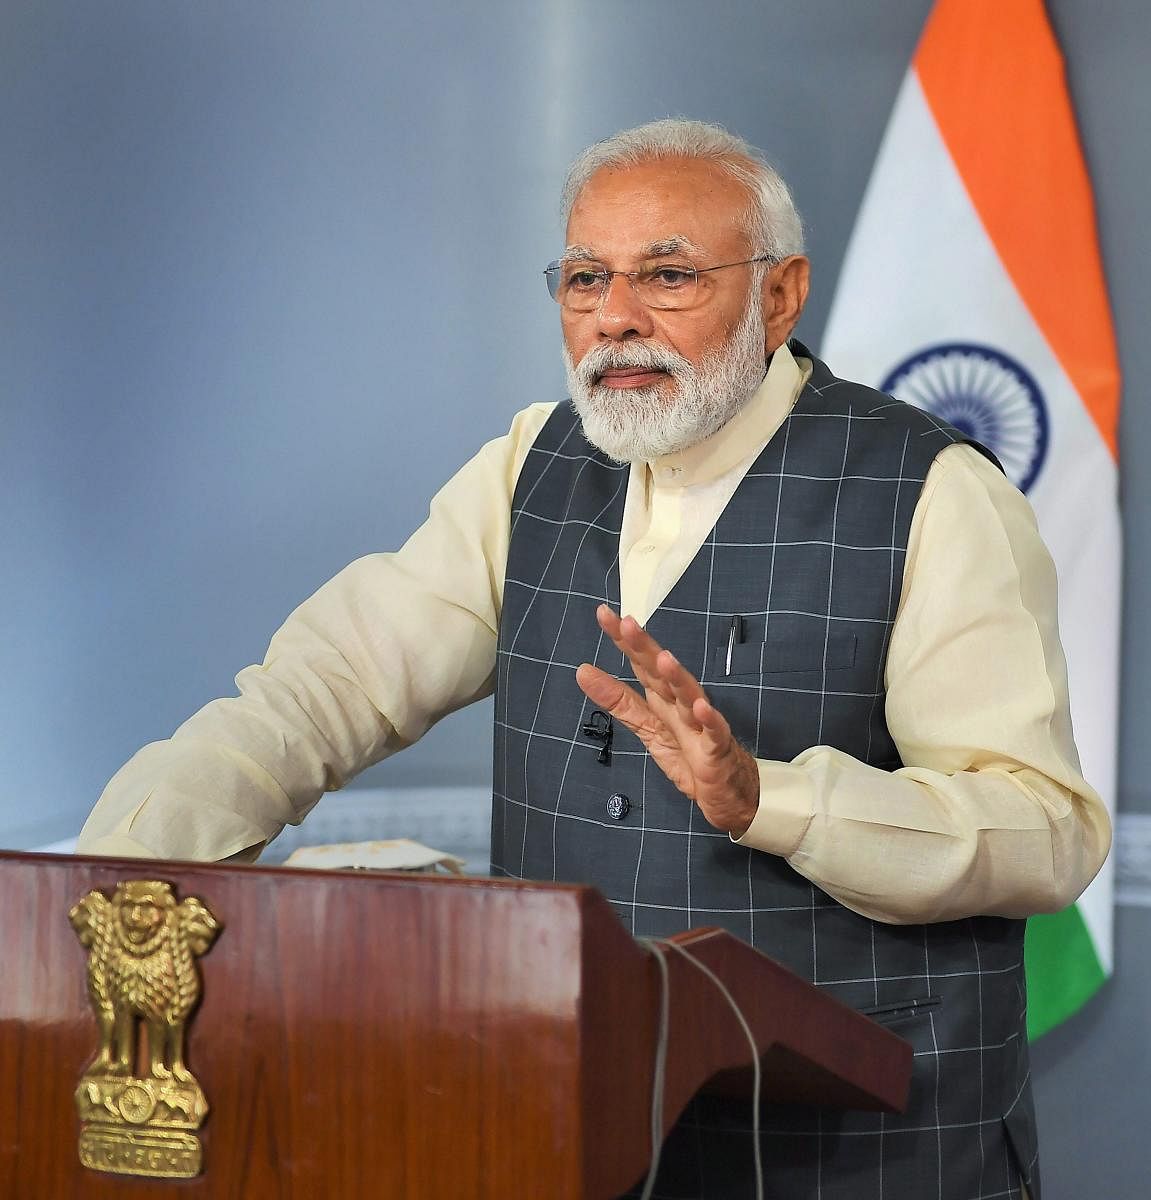 Prime Minister Narendra Modi on Friday claimed that "non-cooperation" by the previous Samajwadi Party government in Uttar Pradesh was responsible for the delay in start of a beautification project in his Lok Sabha constituency. PTI file photo